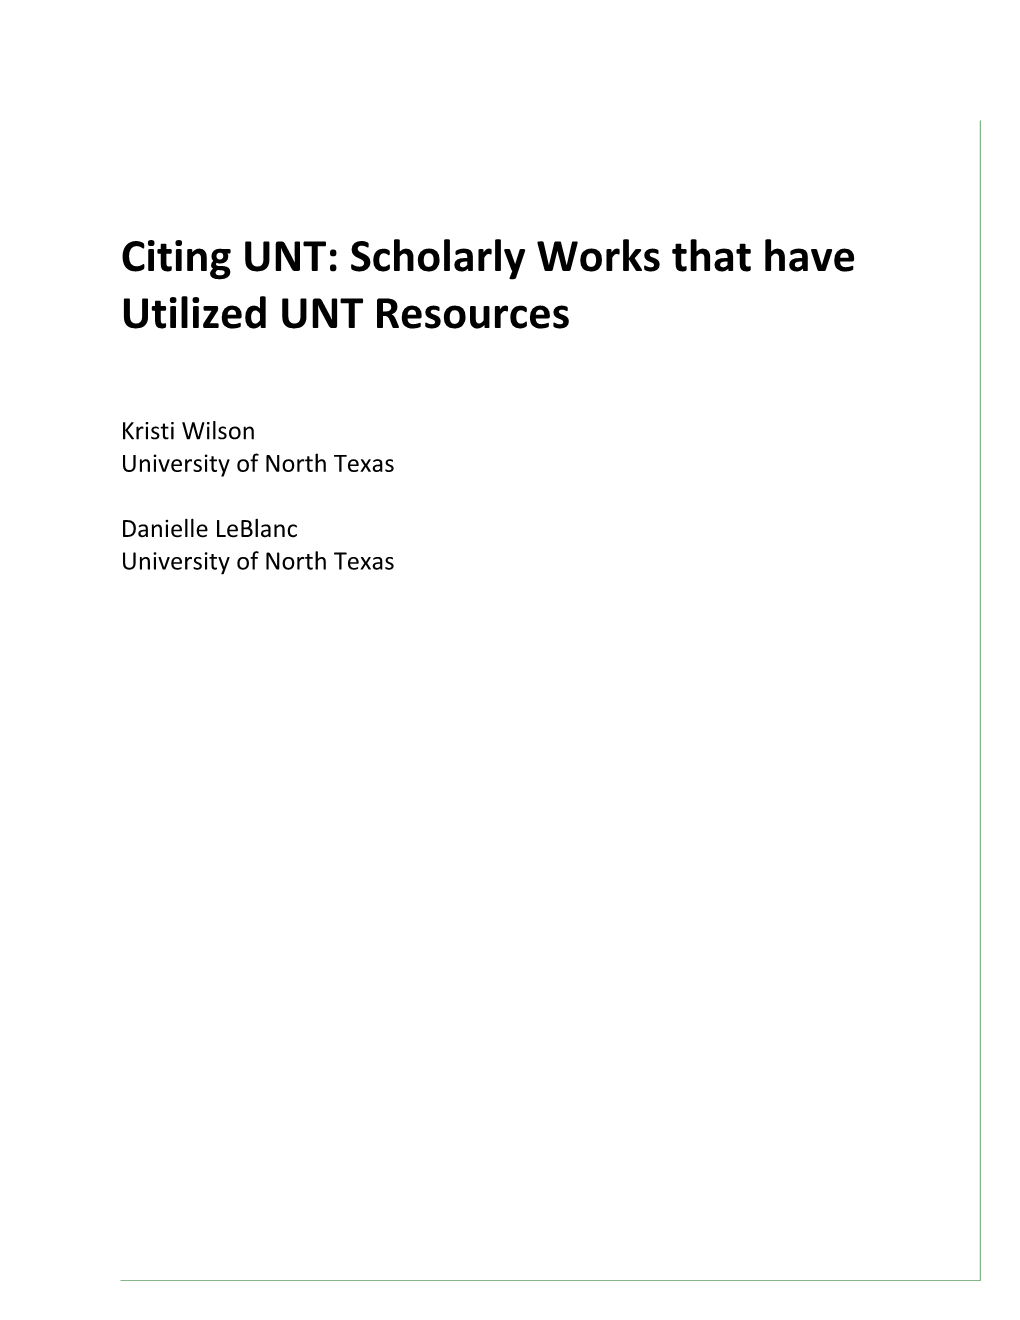 Citing UNT: Scholarly Works That Have Utilized UNT Resources